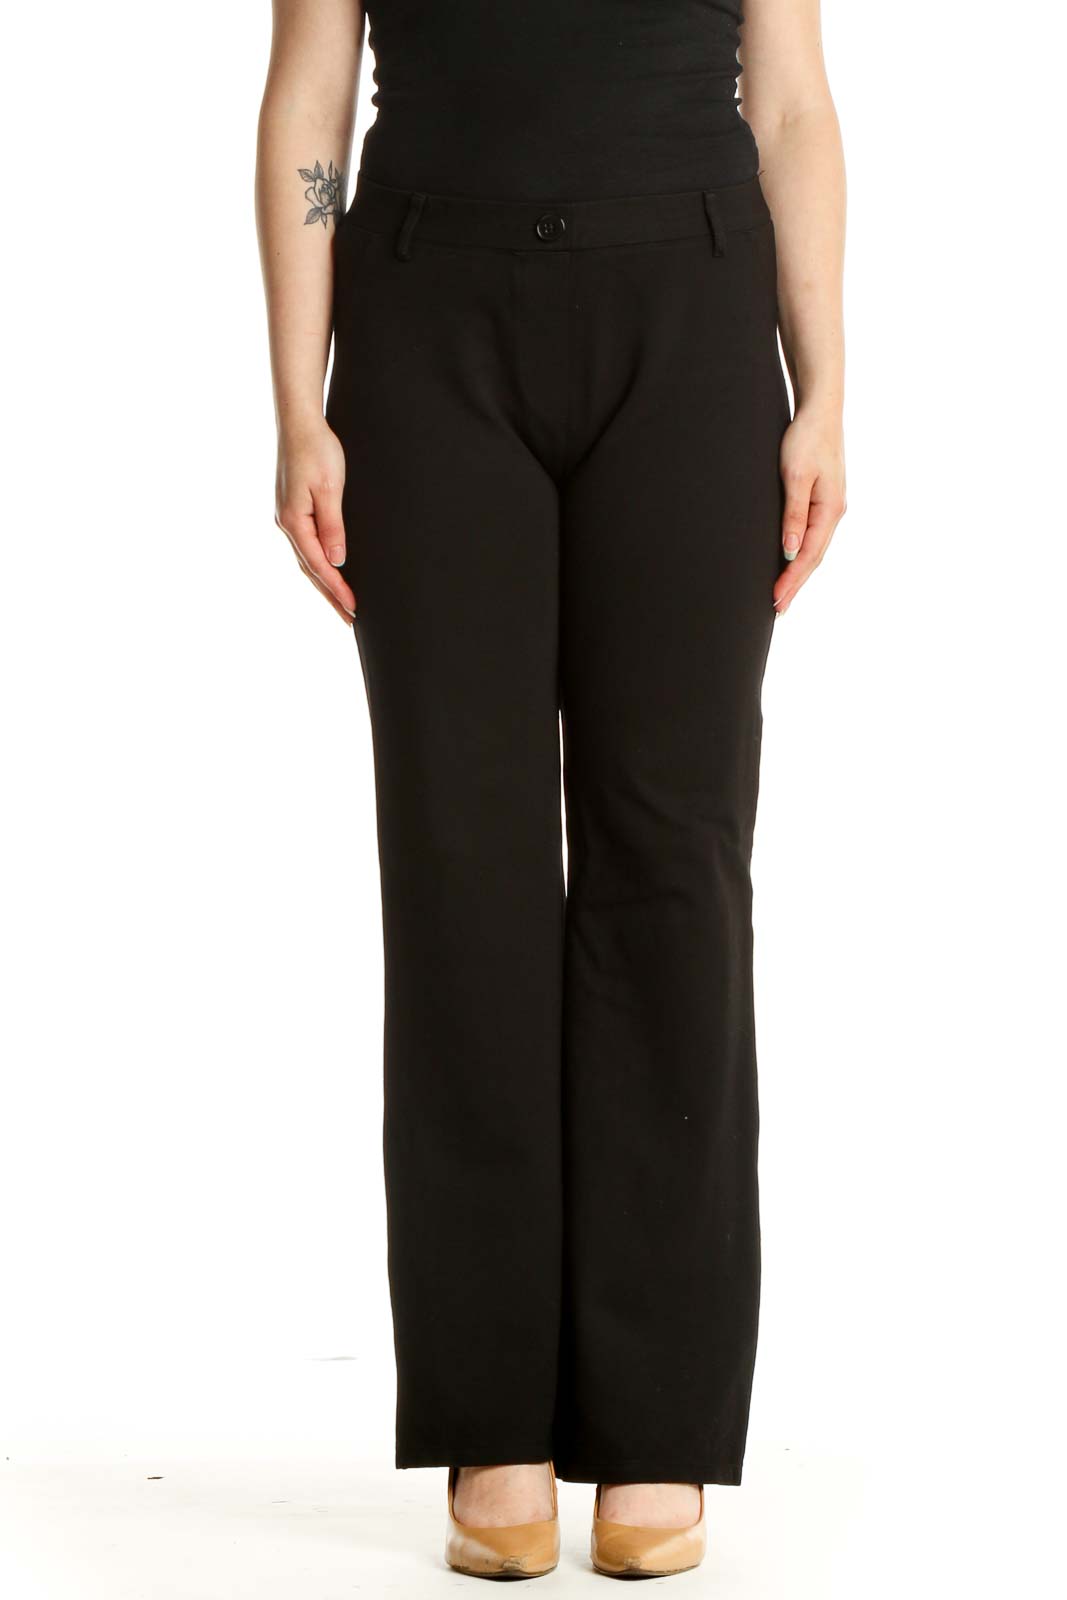 Black Solid All Day Wear Trousers Front